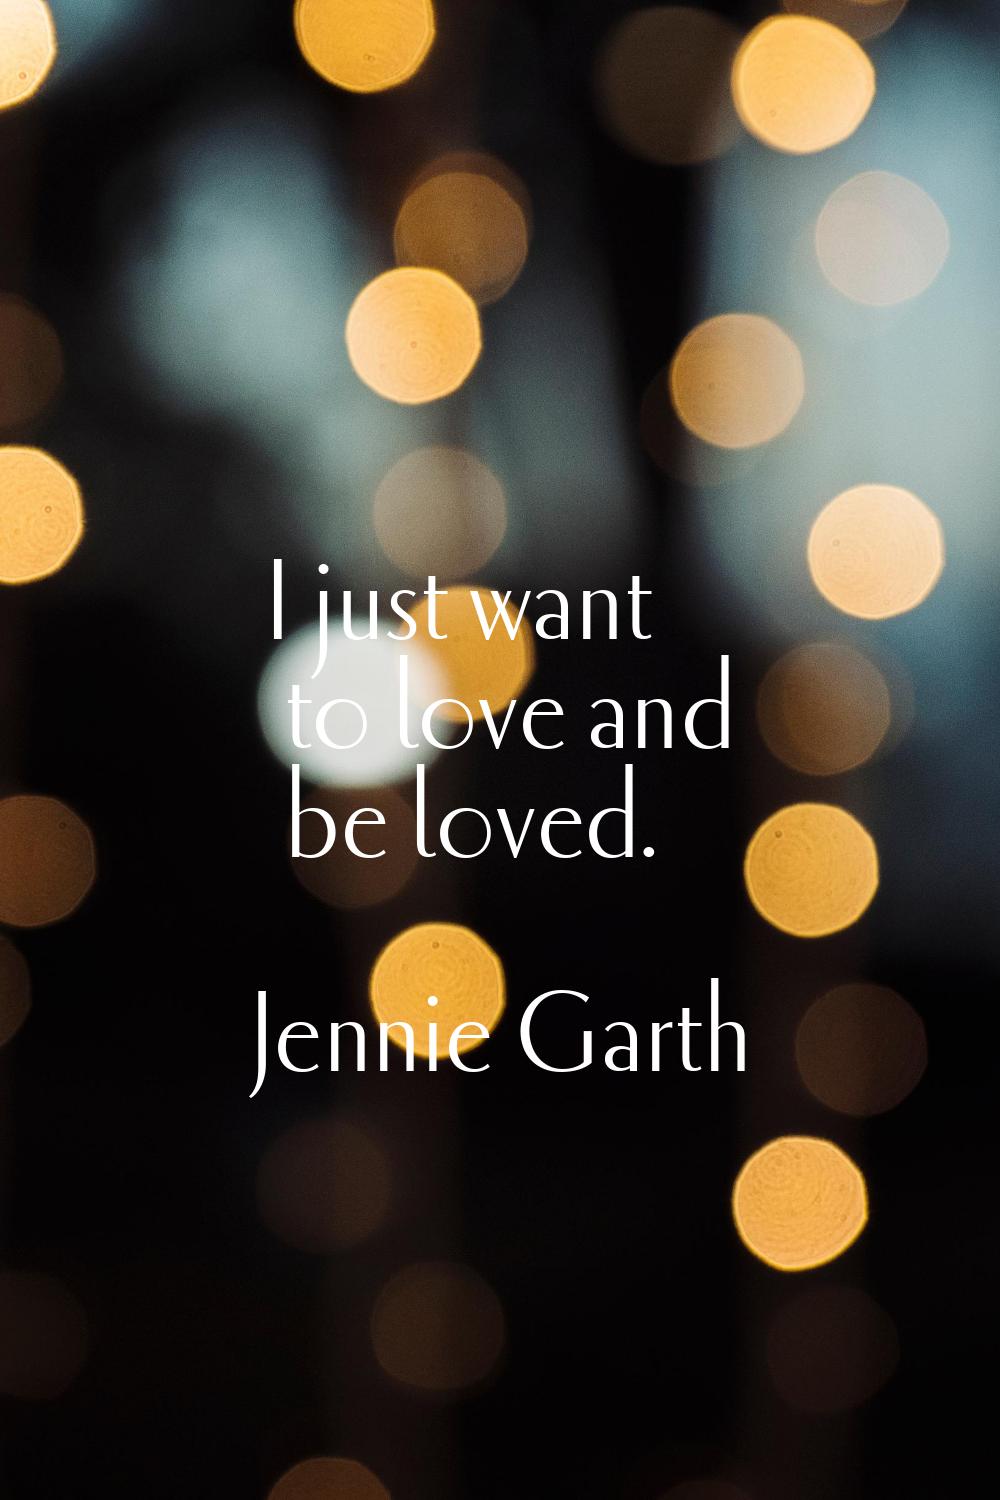 I just want to love and be loved.